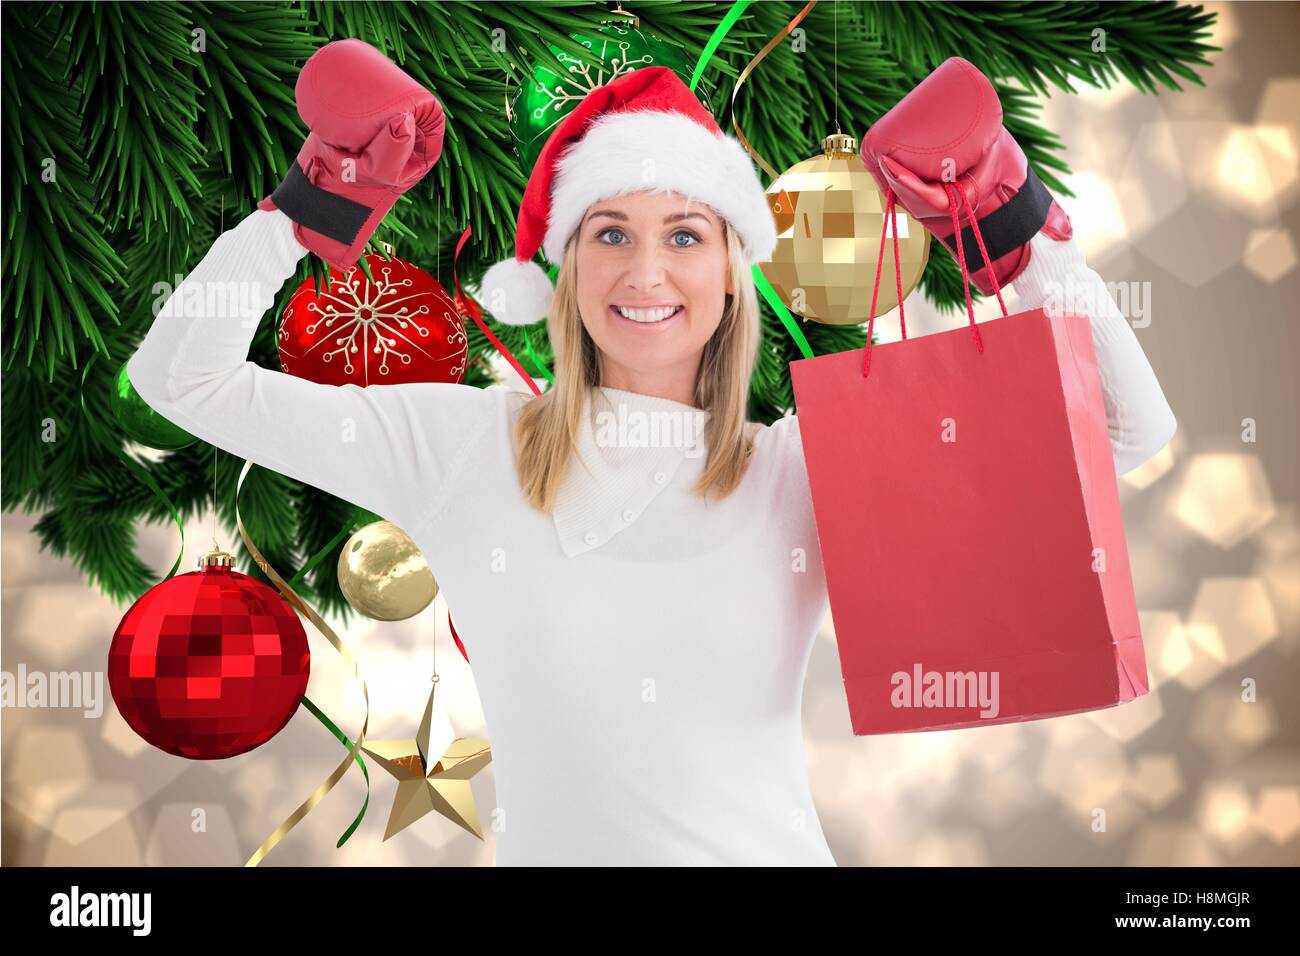 Beautiful woman in santa hat and boxing gloves holding shopping bag Stock Photo